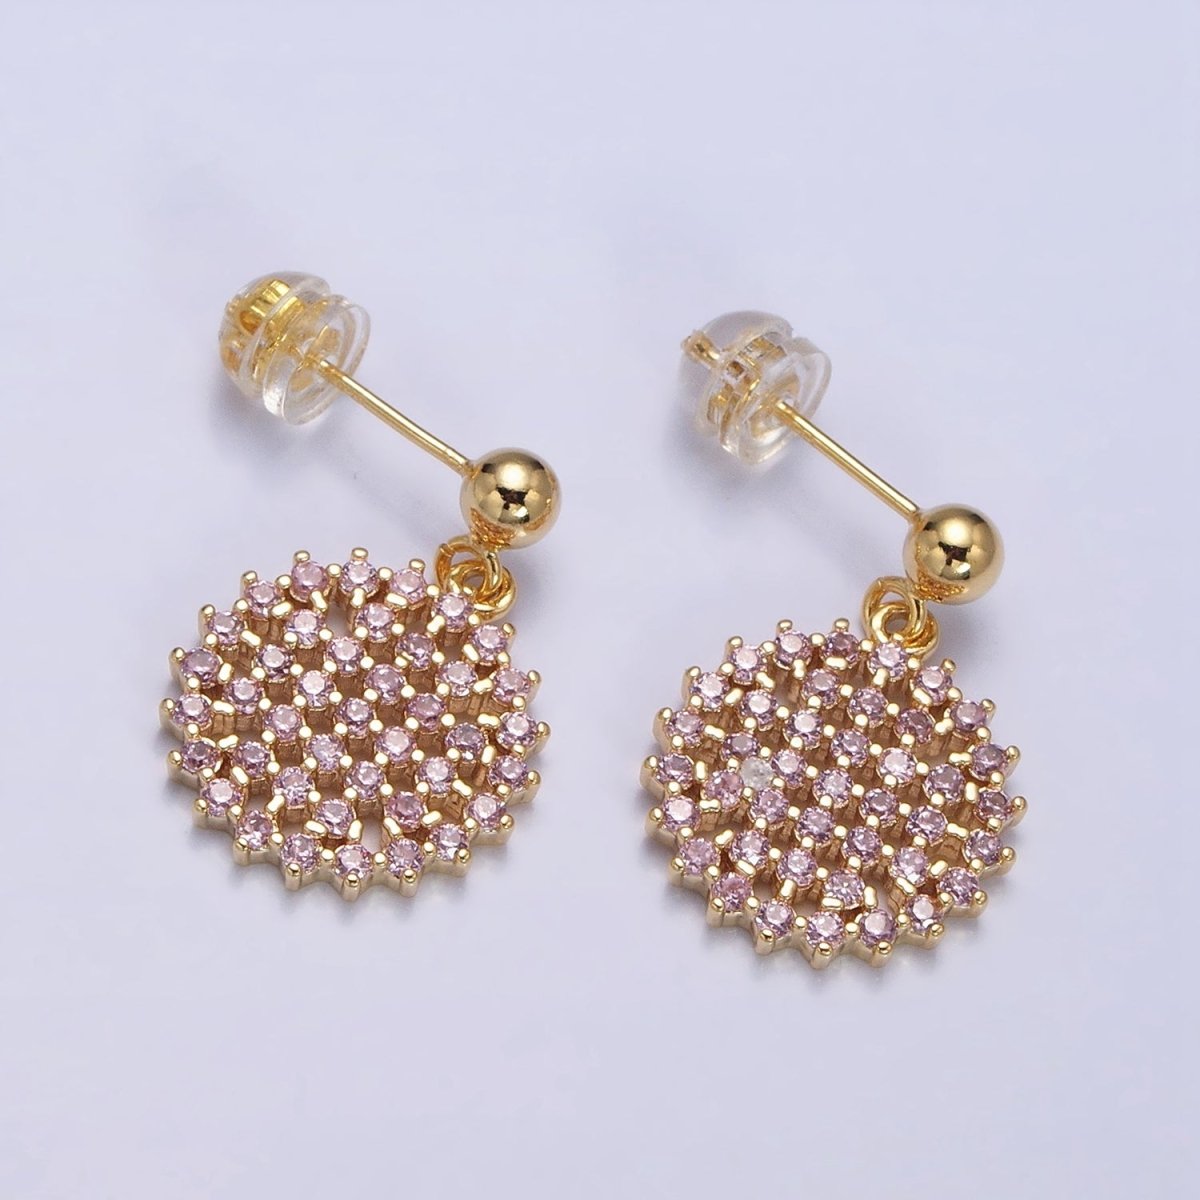 Dainty Gold Filled Stud Earring with Round Circle CZ Charm Dangle Charm Multi Color CZ Stone AD1516 - AD1519 - DLUXCA